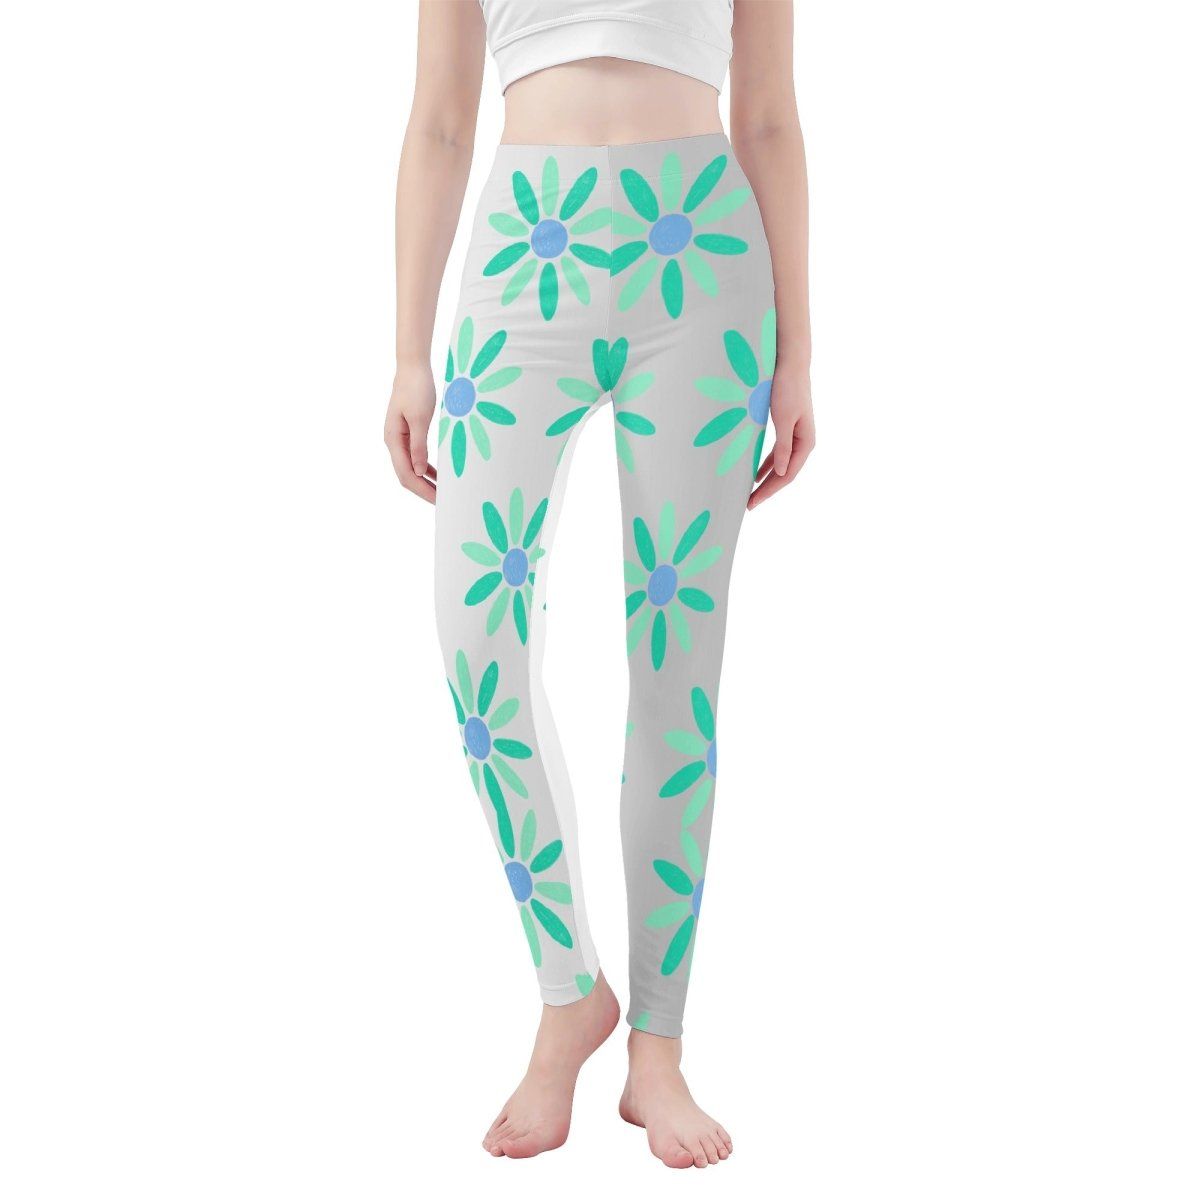 Teal and Grey Soft Yoga Leggings - Comfortable Workout Pants for Women - Iron Phoenix GHG